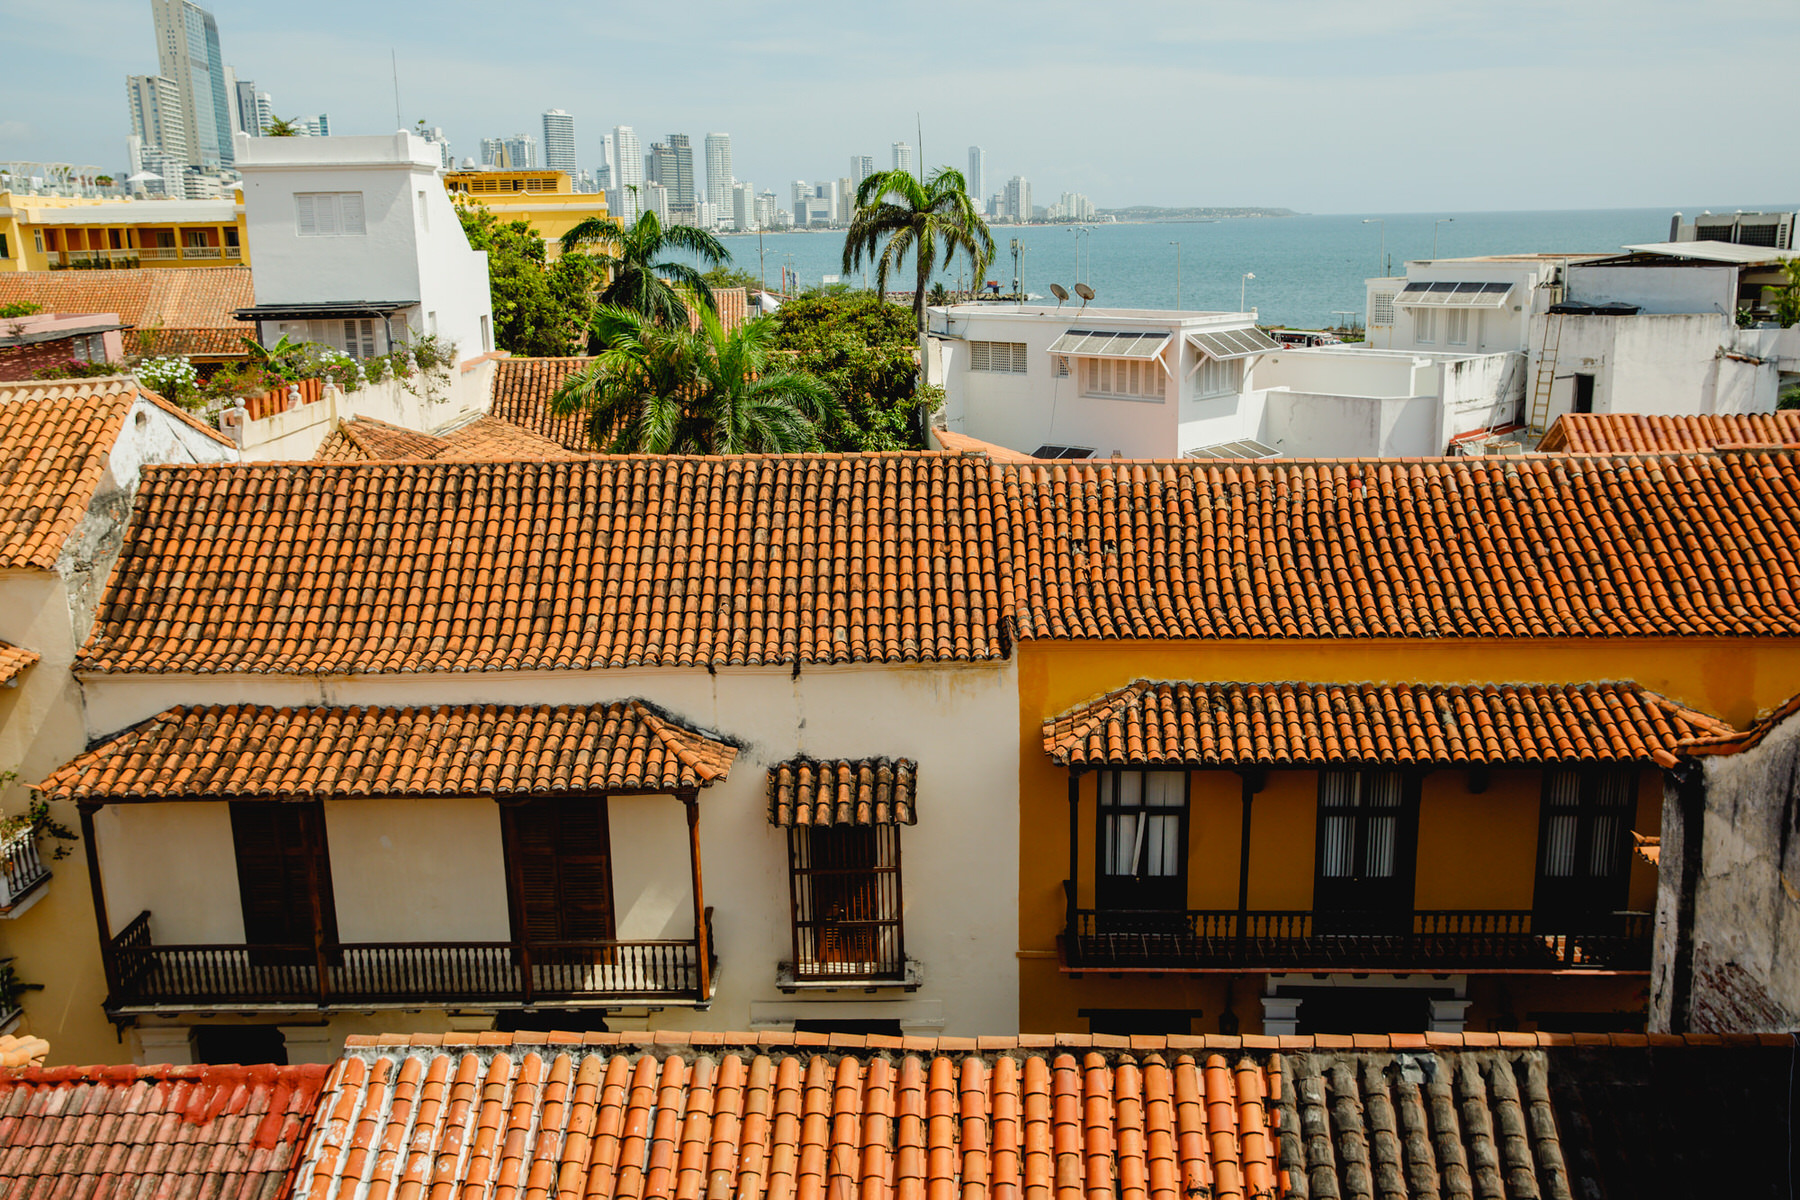 Rooftop view of the Walled City, Cartagena de Indias